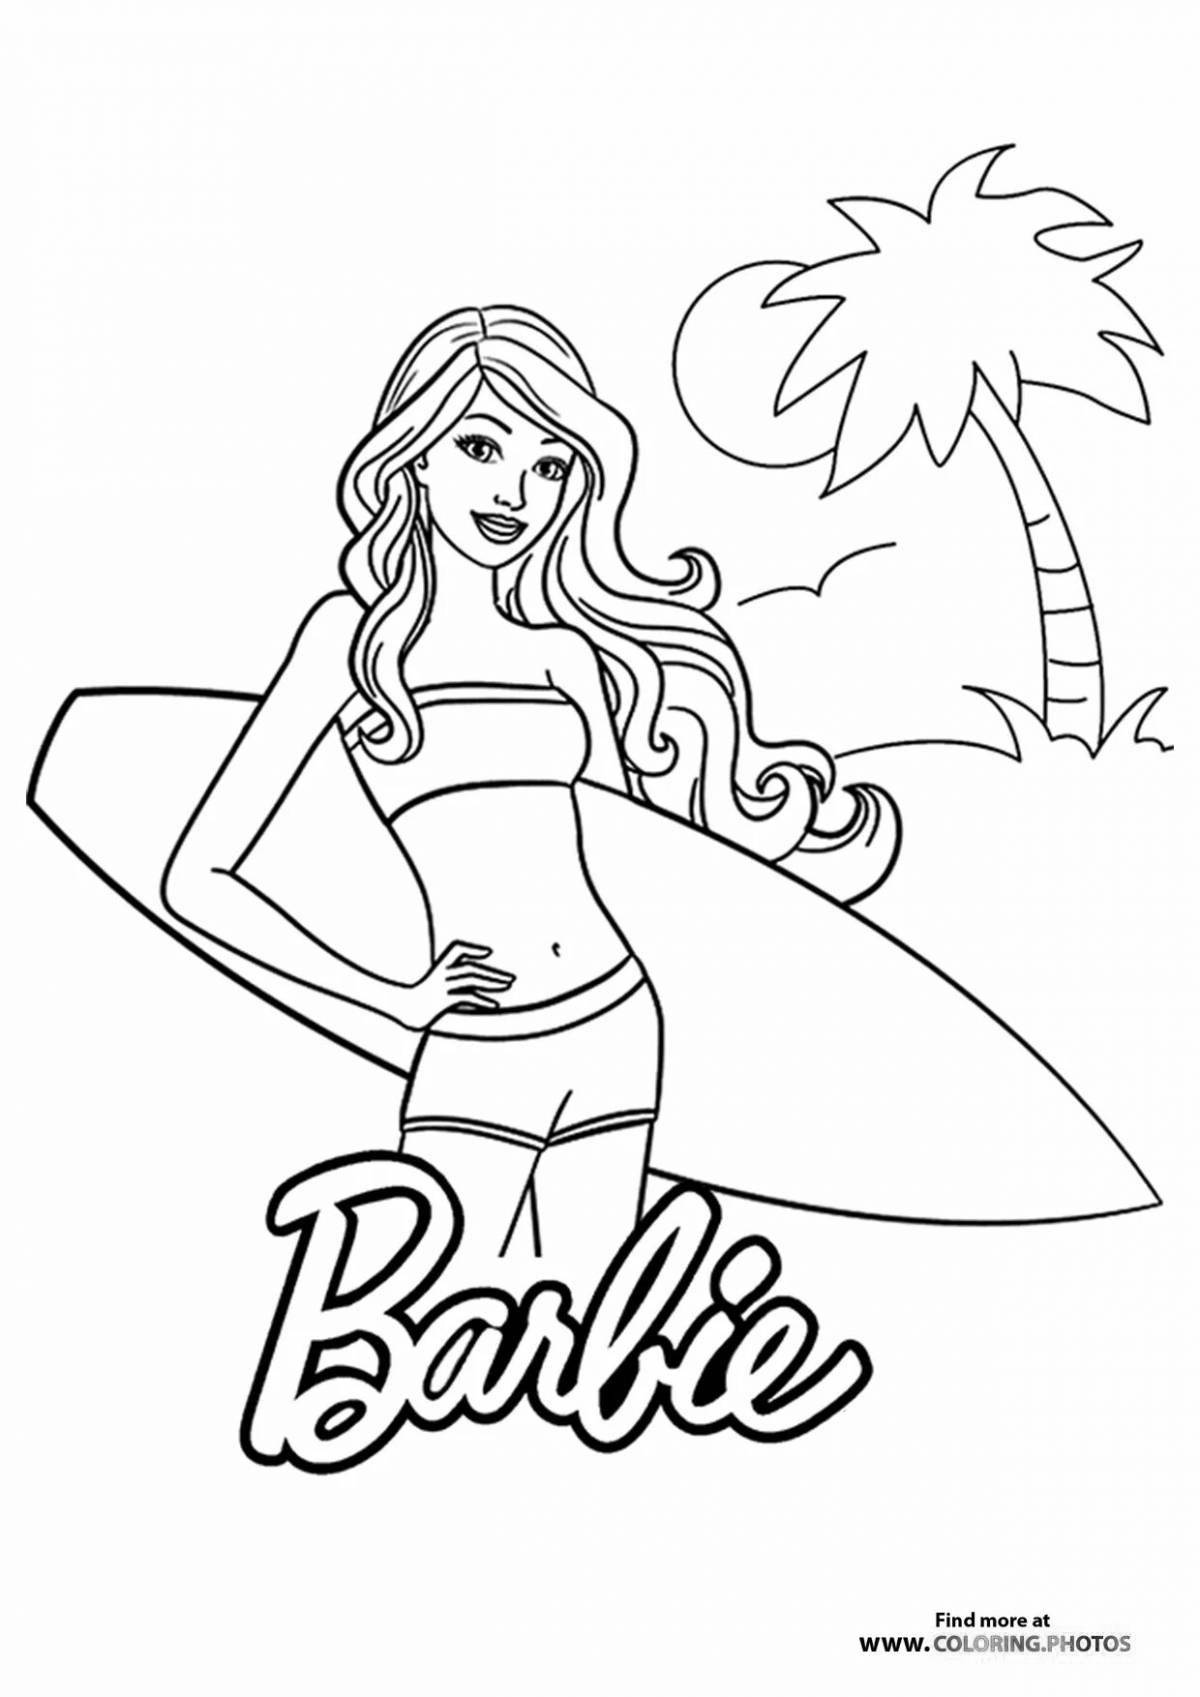 Coloring page wild barbie on the beach